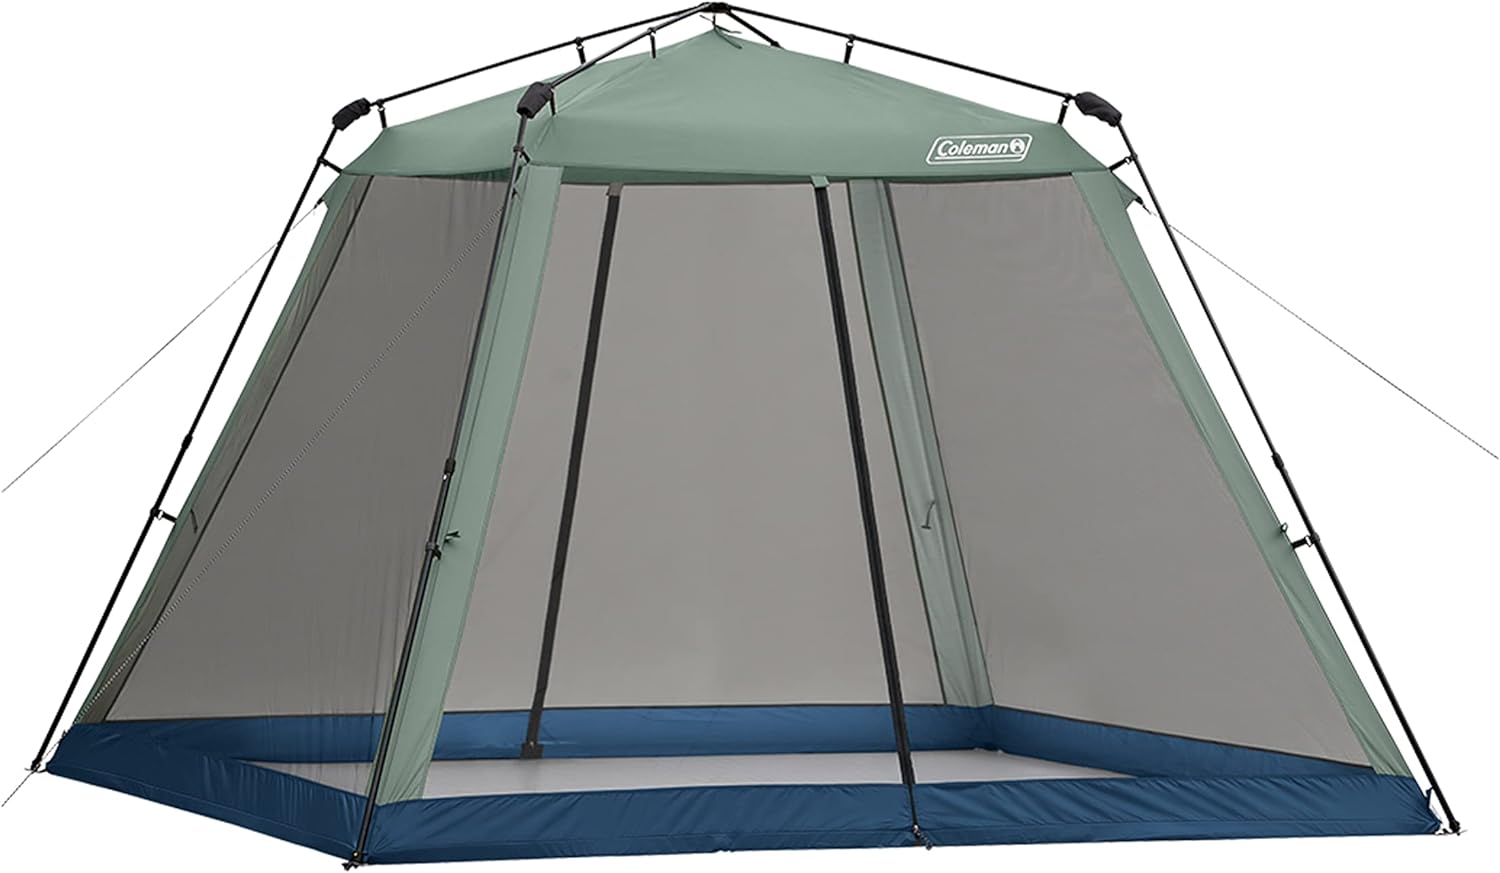 Coleman Skylodge Screened Canopy Tent with Instant Setup, 10x10/15x13ft Portable Screen Shelter with 1-Minute Setup for Bug-Free Lounging, Great for Picnic, Yard, Beach, Park, Camping, & More